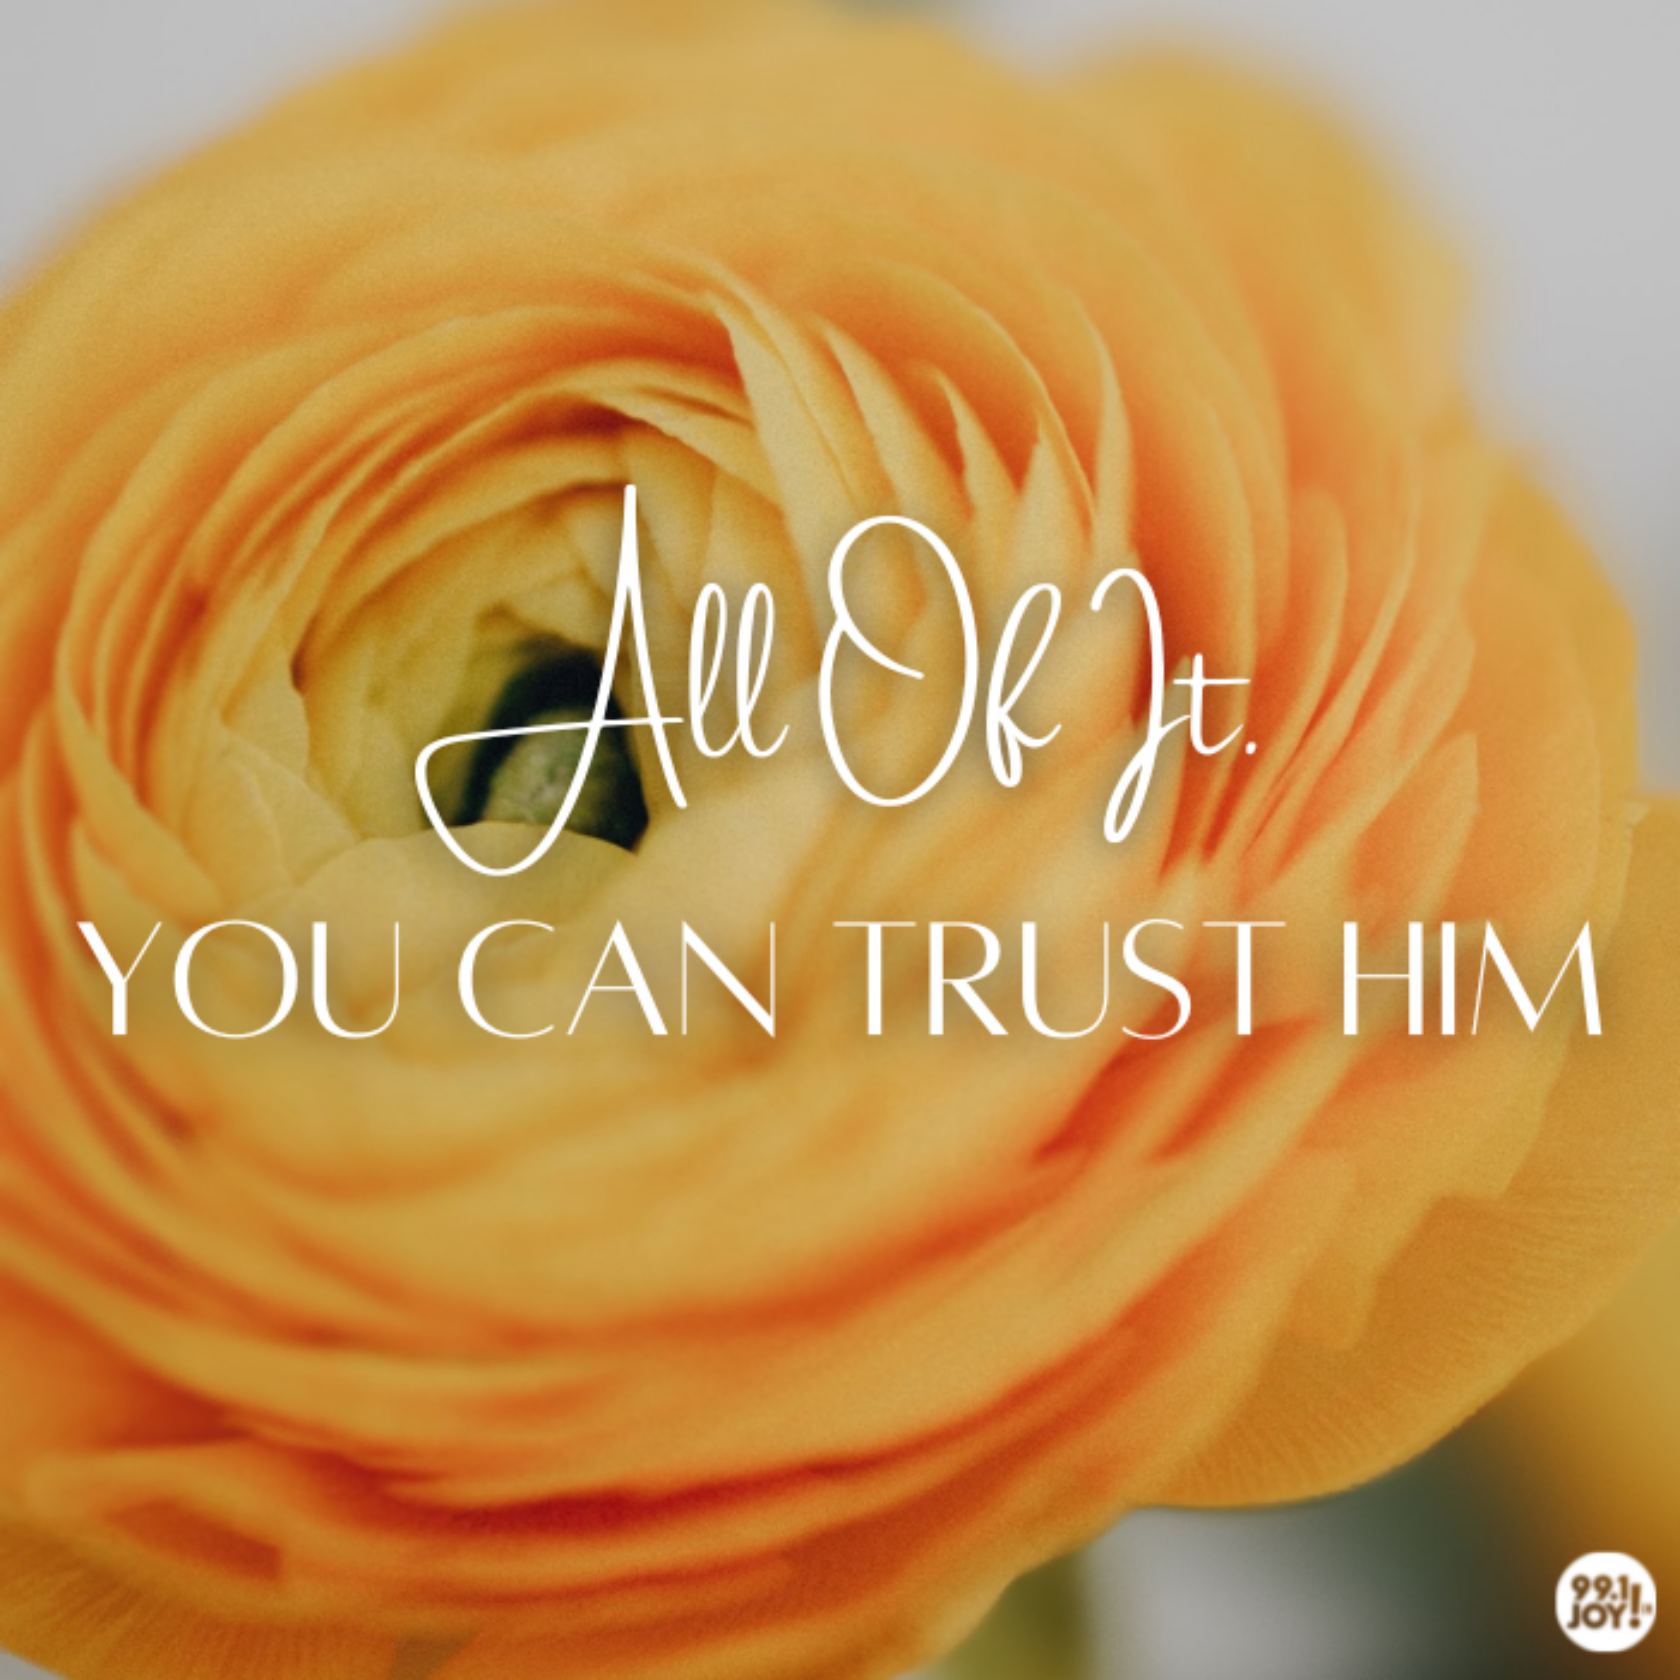 All Of It. You Can Trust Him